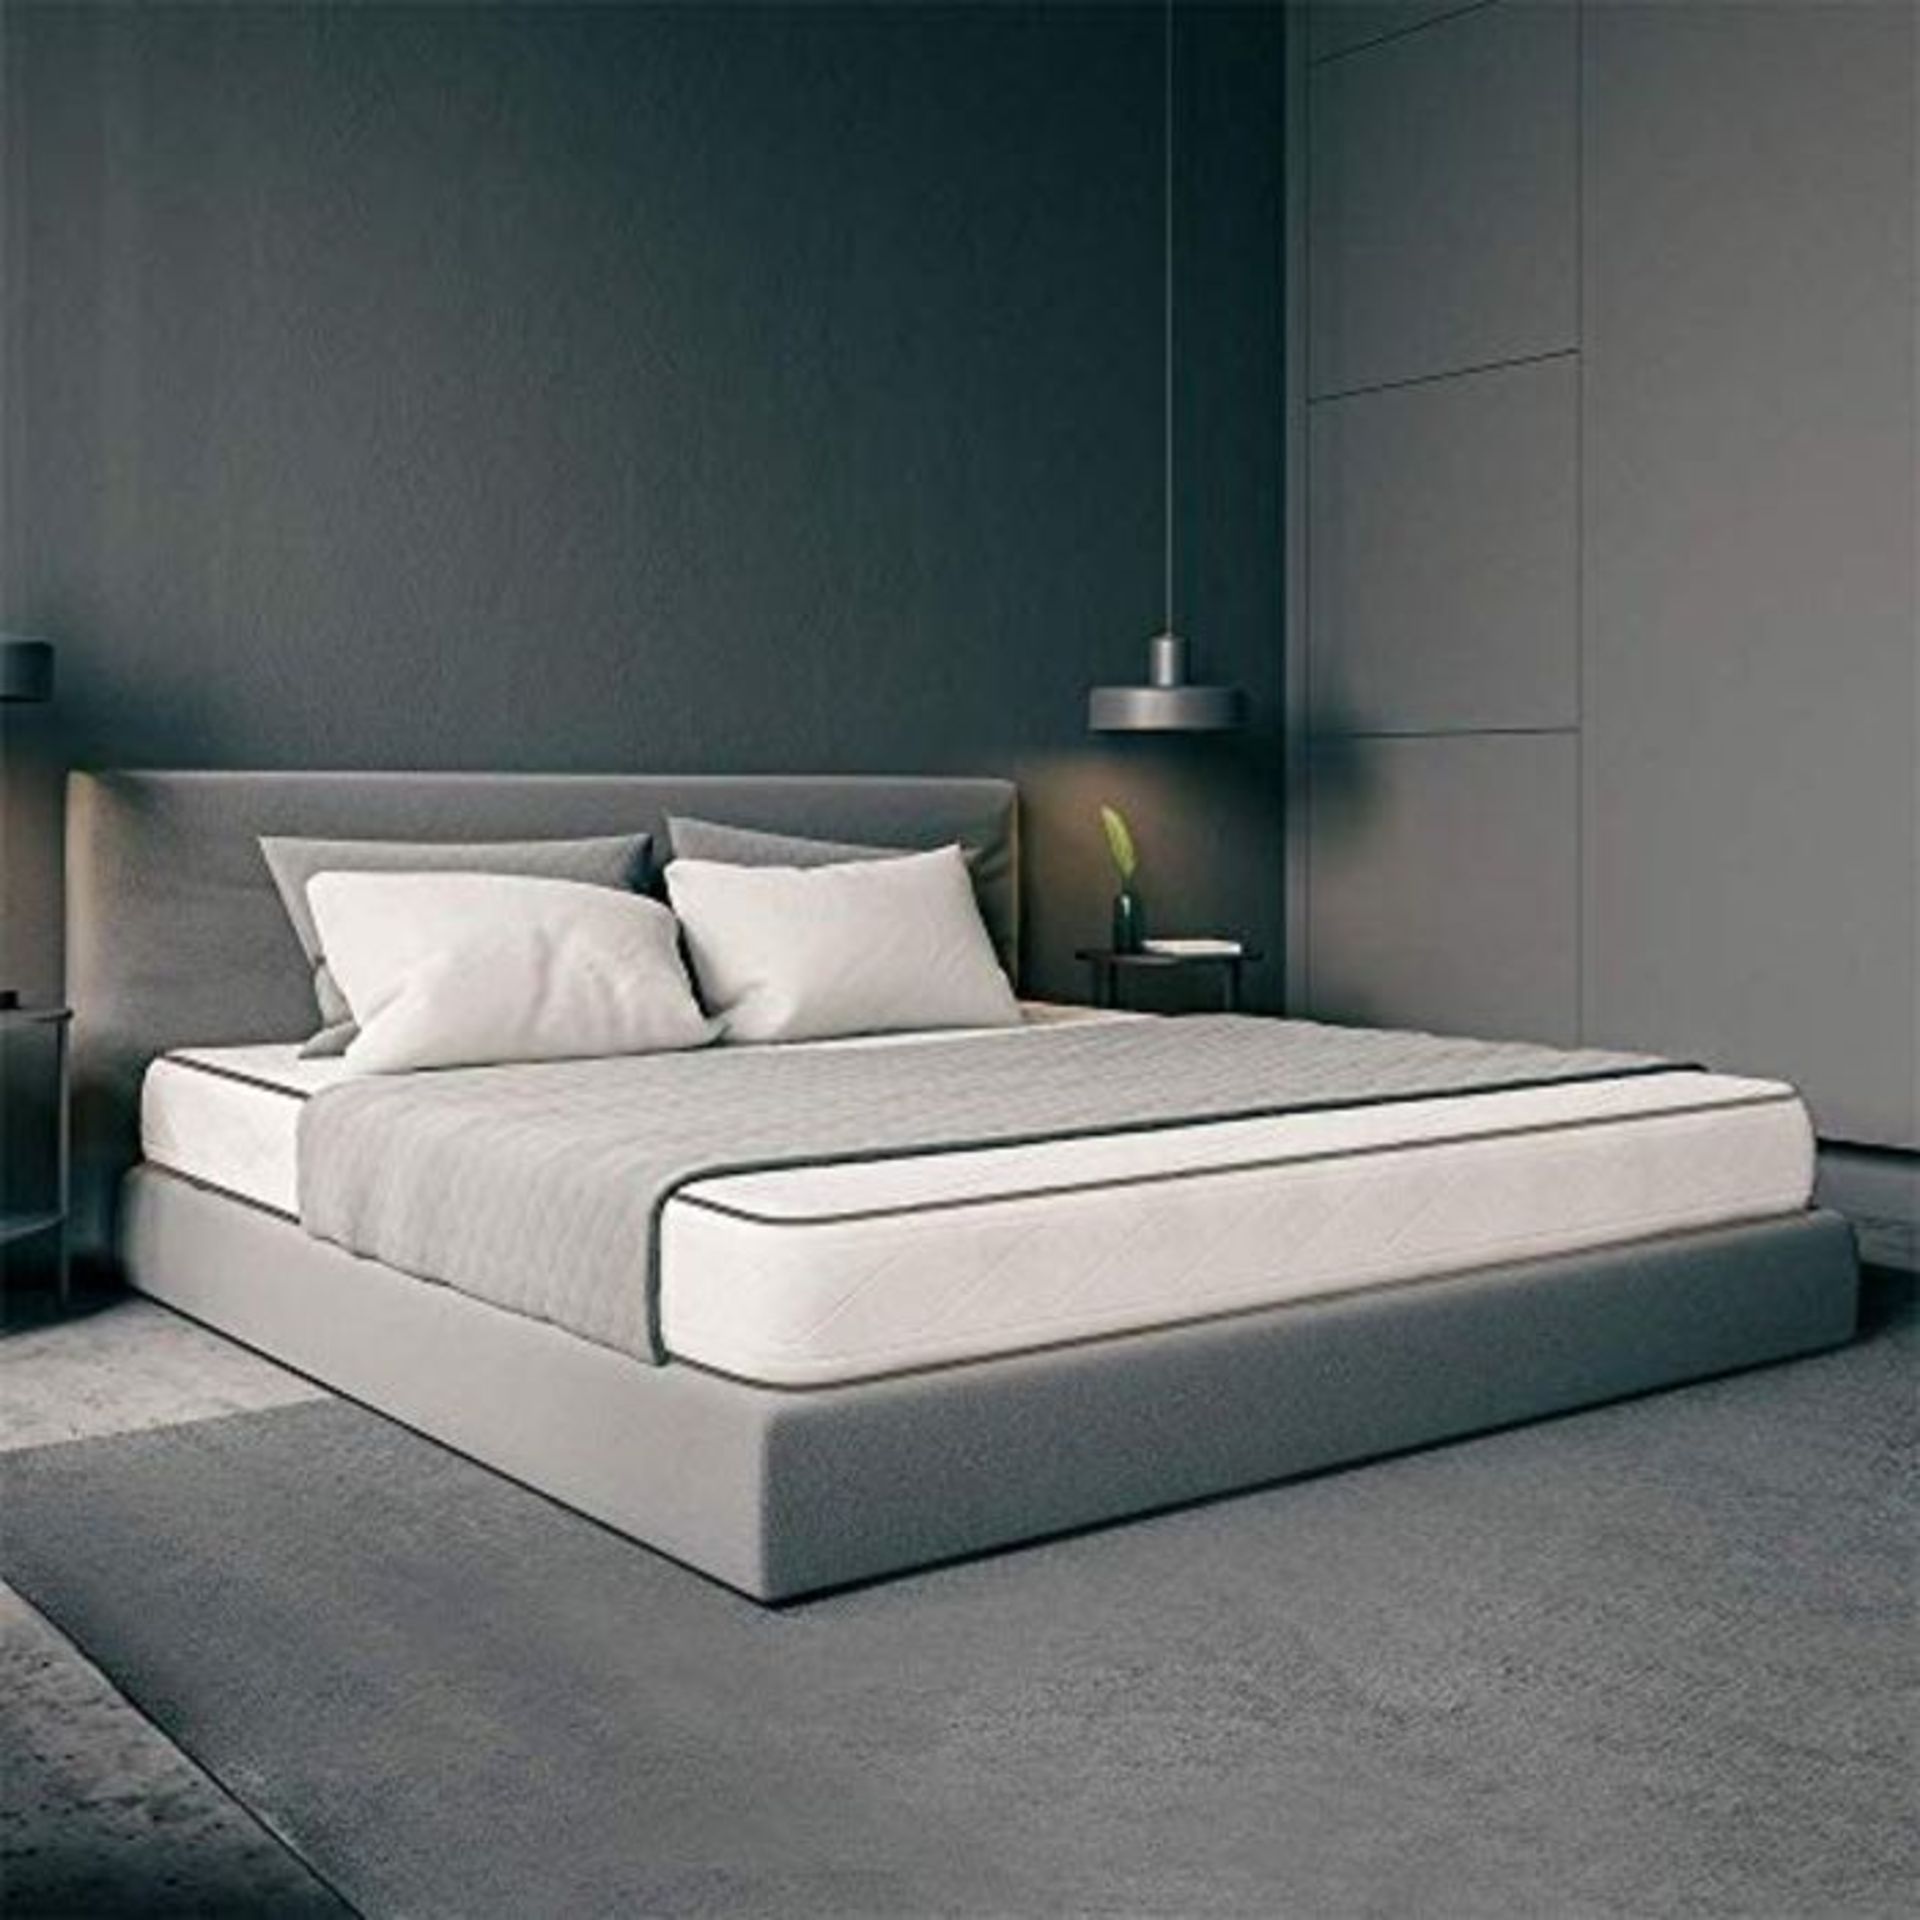 RRP £79.00 Waterfoam Mattress, Height 20 cm, Orthopaedic Cotton Cover, Model: Spring 80 x 190 cm,